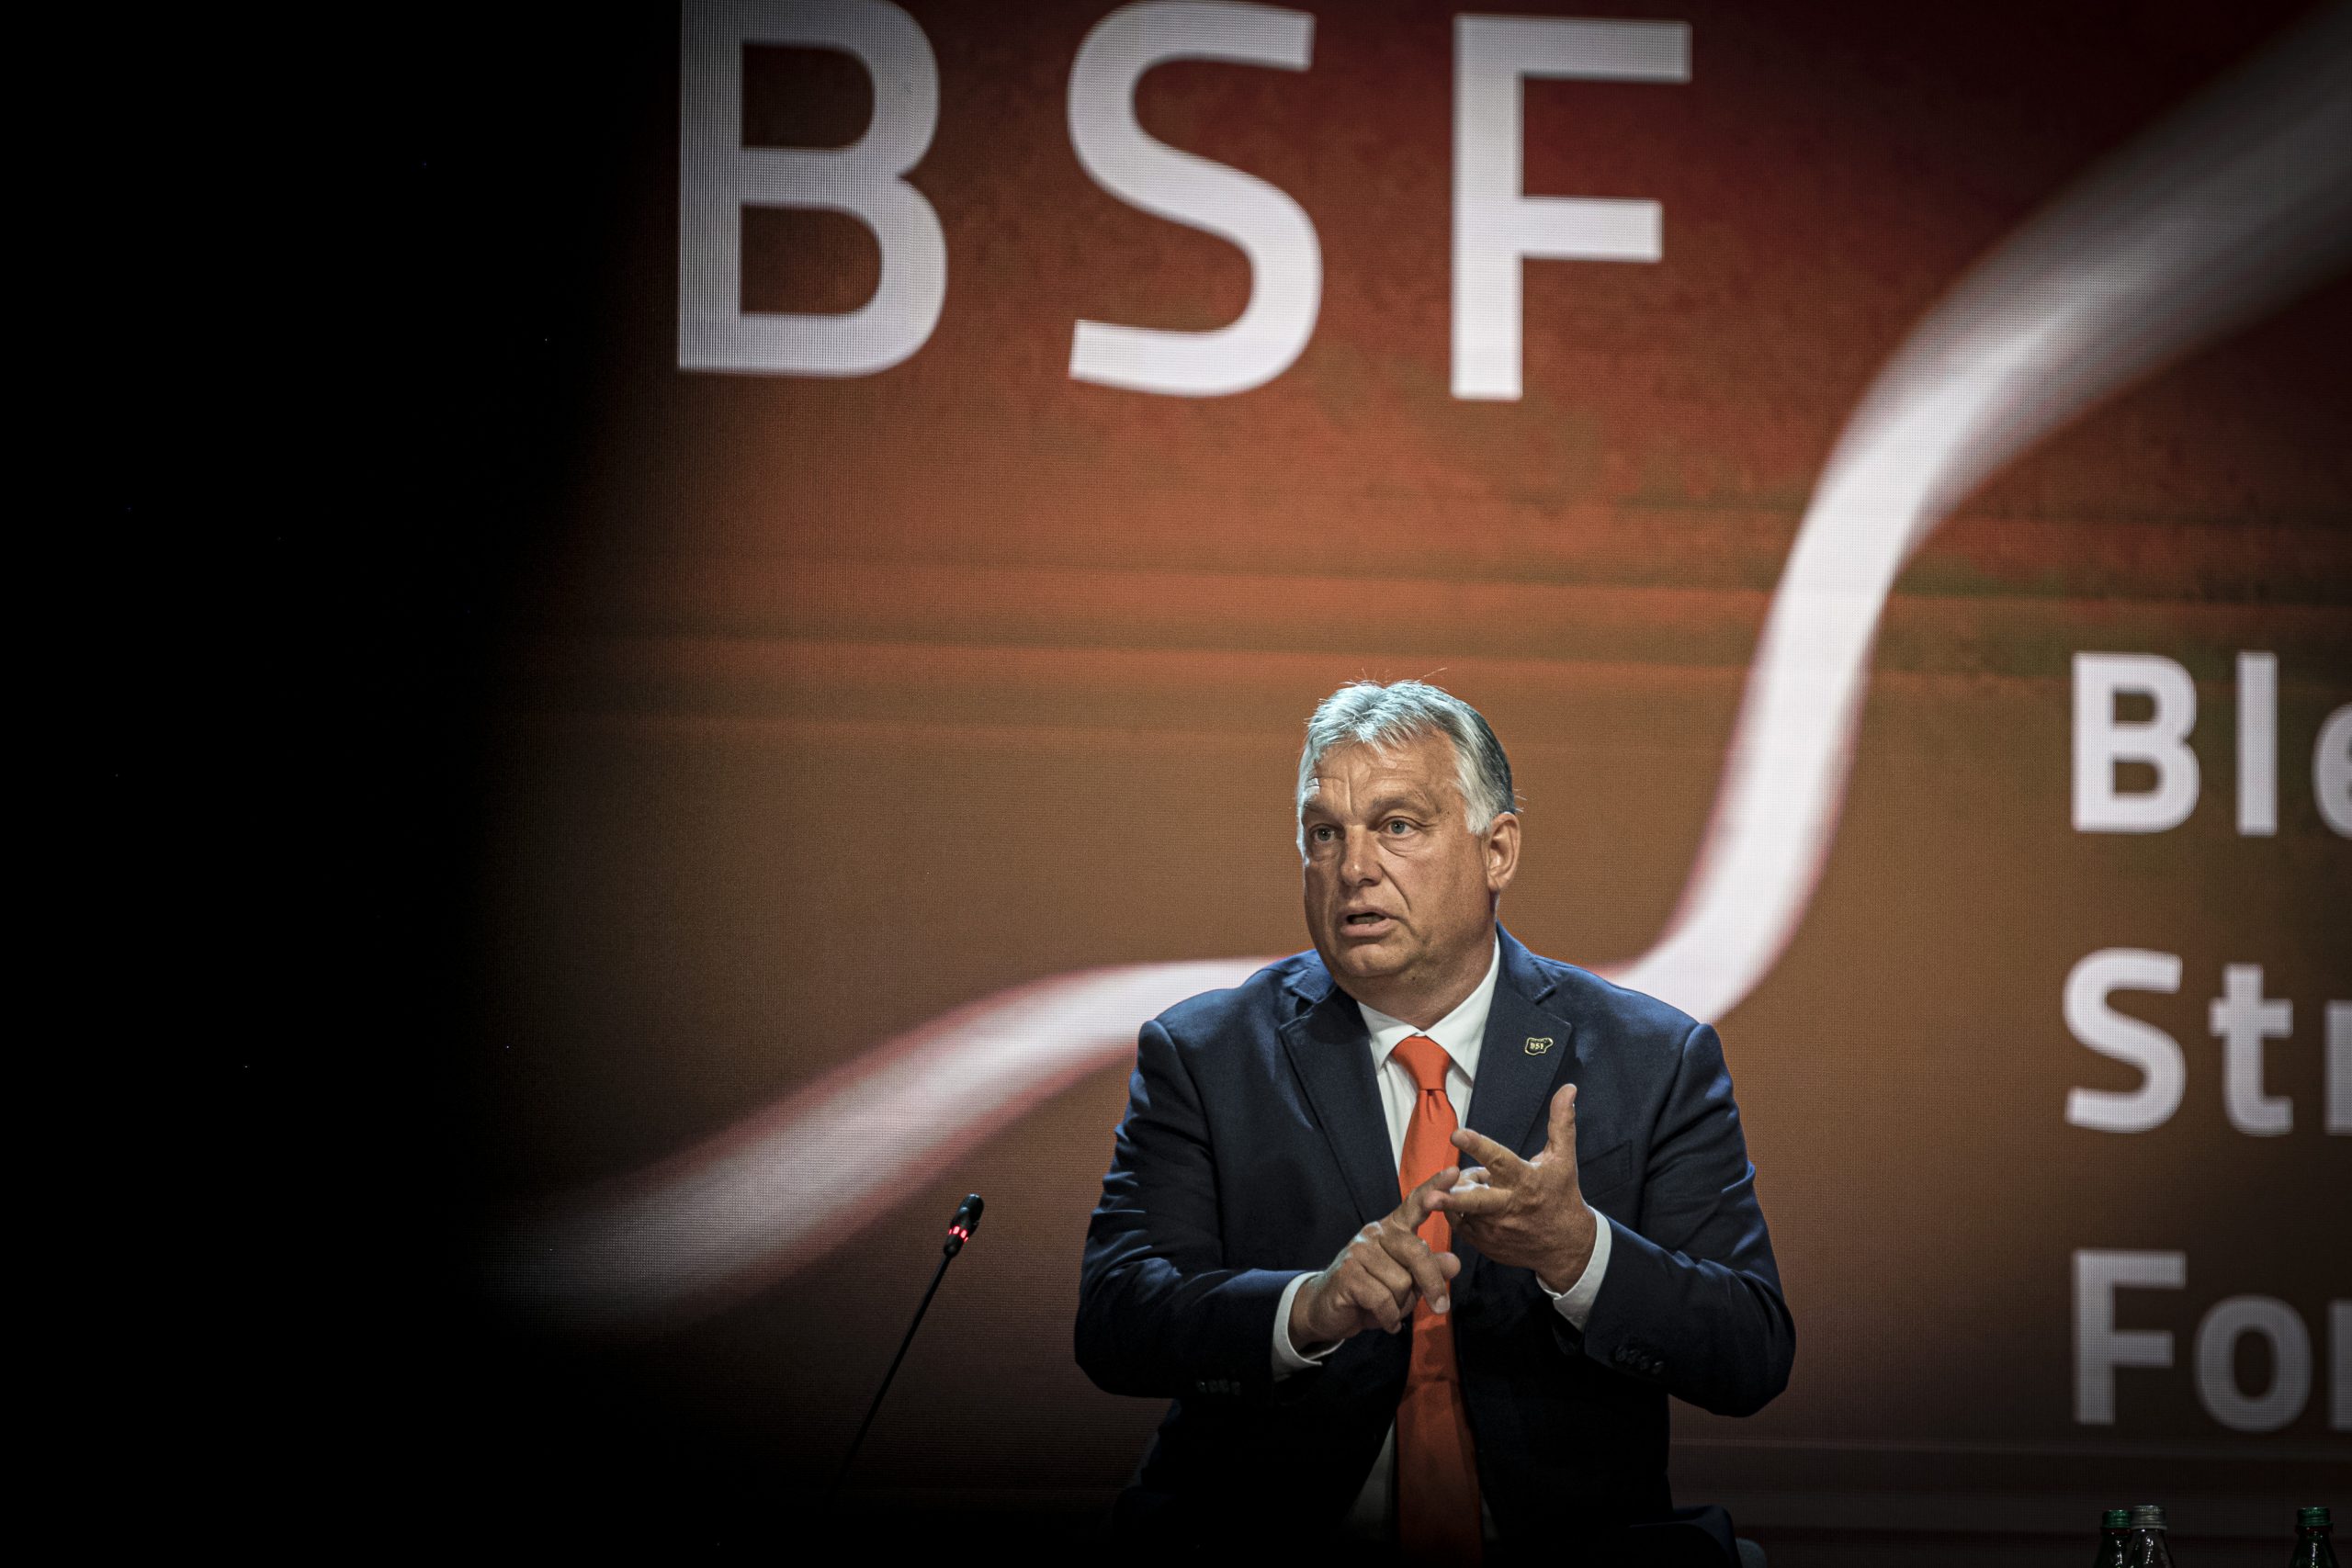 PM Orbán Calls on EU to Give All Rights Relating to Migration Back to Member States